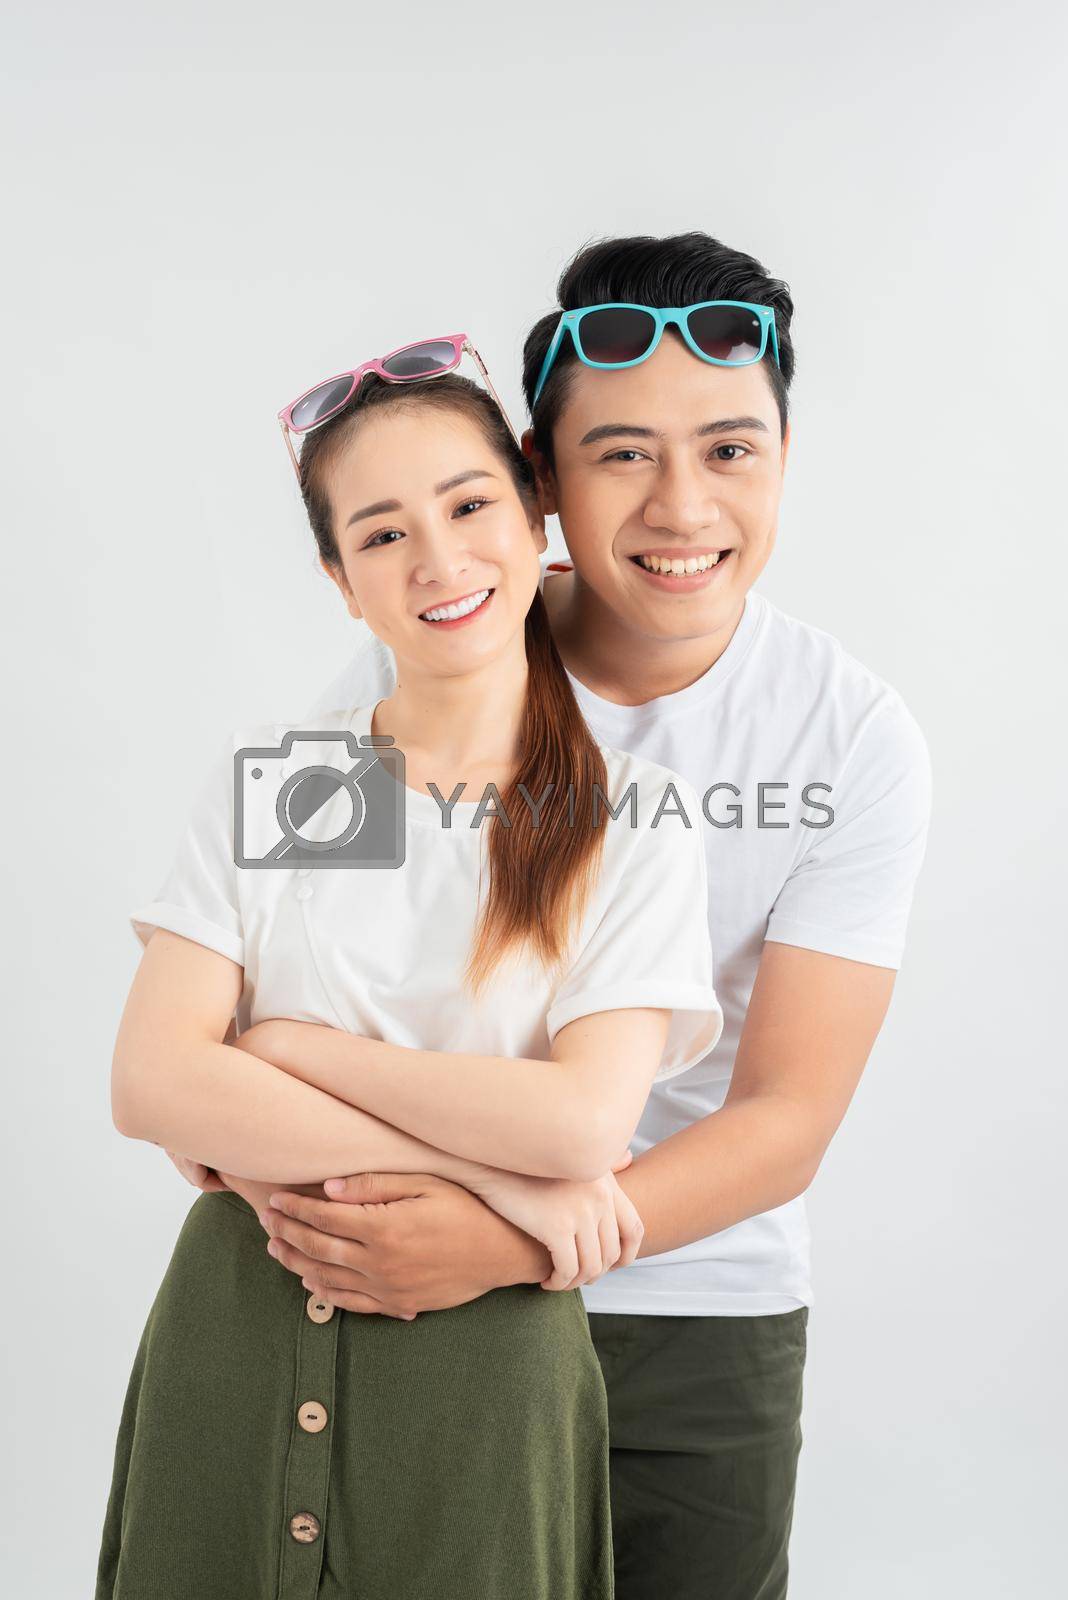 Royalty free image of happy couple embracing, isolated on white background, man in glasses, Positive emotion facial expression by makidotvn